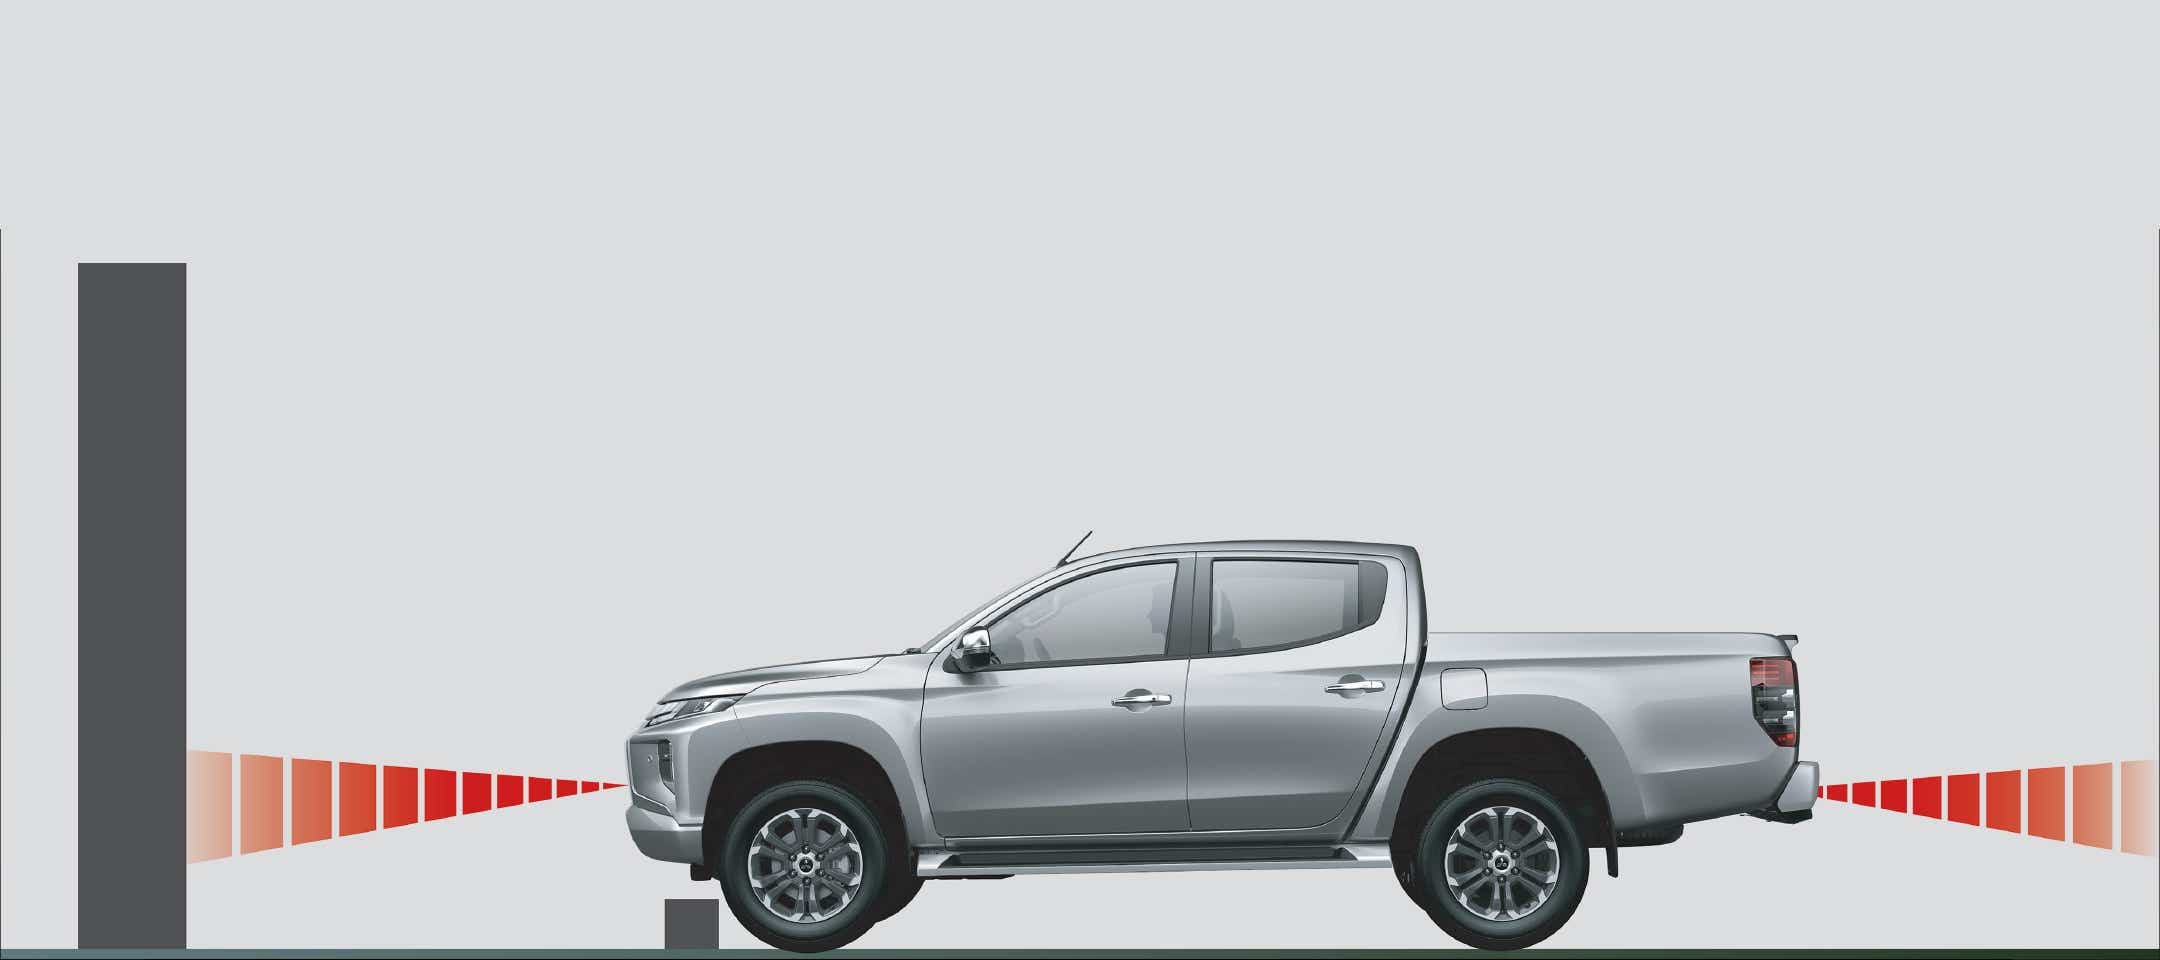 2023 Mitsubishi L200 Loses Camouflage In Speculative Rendering